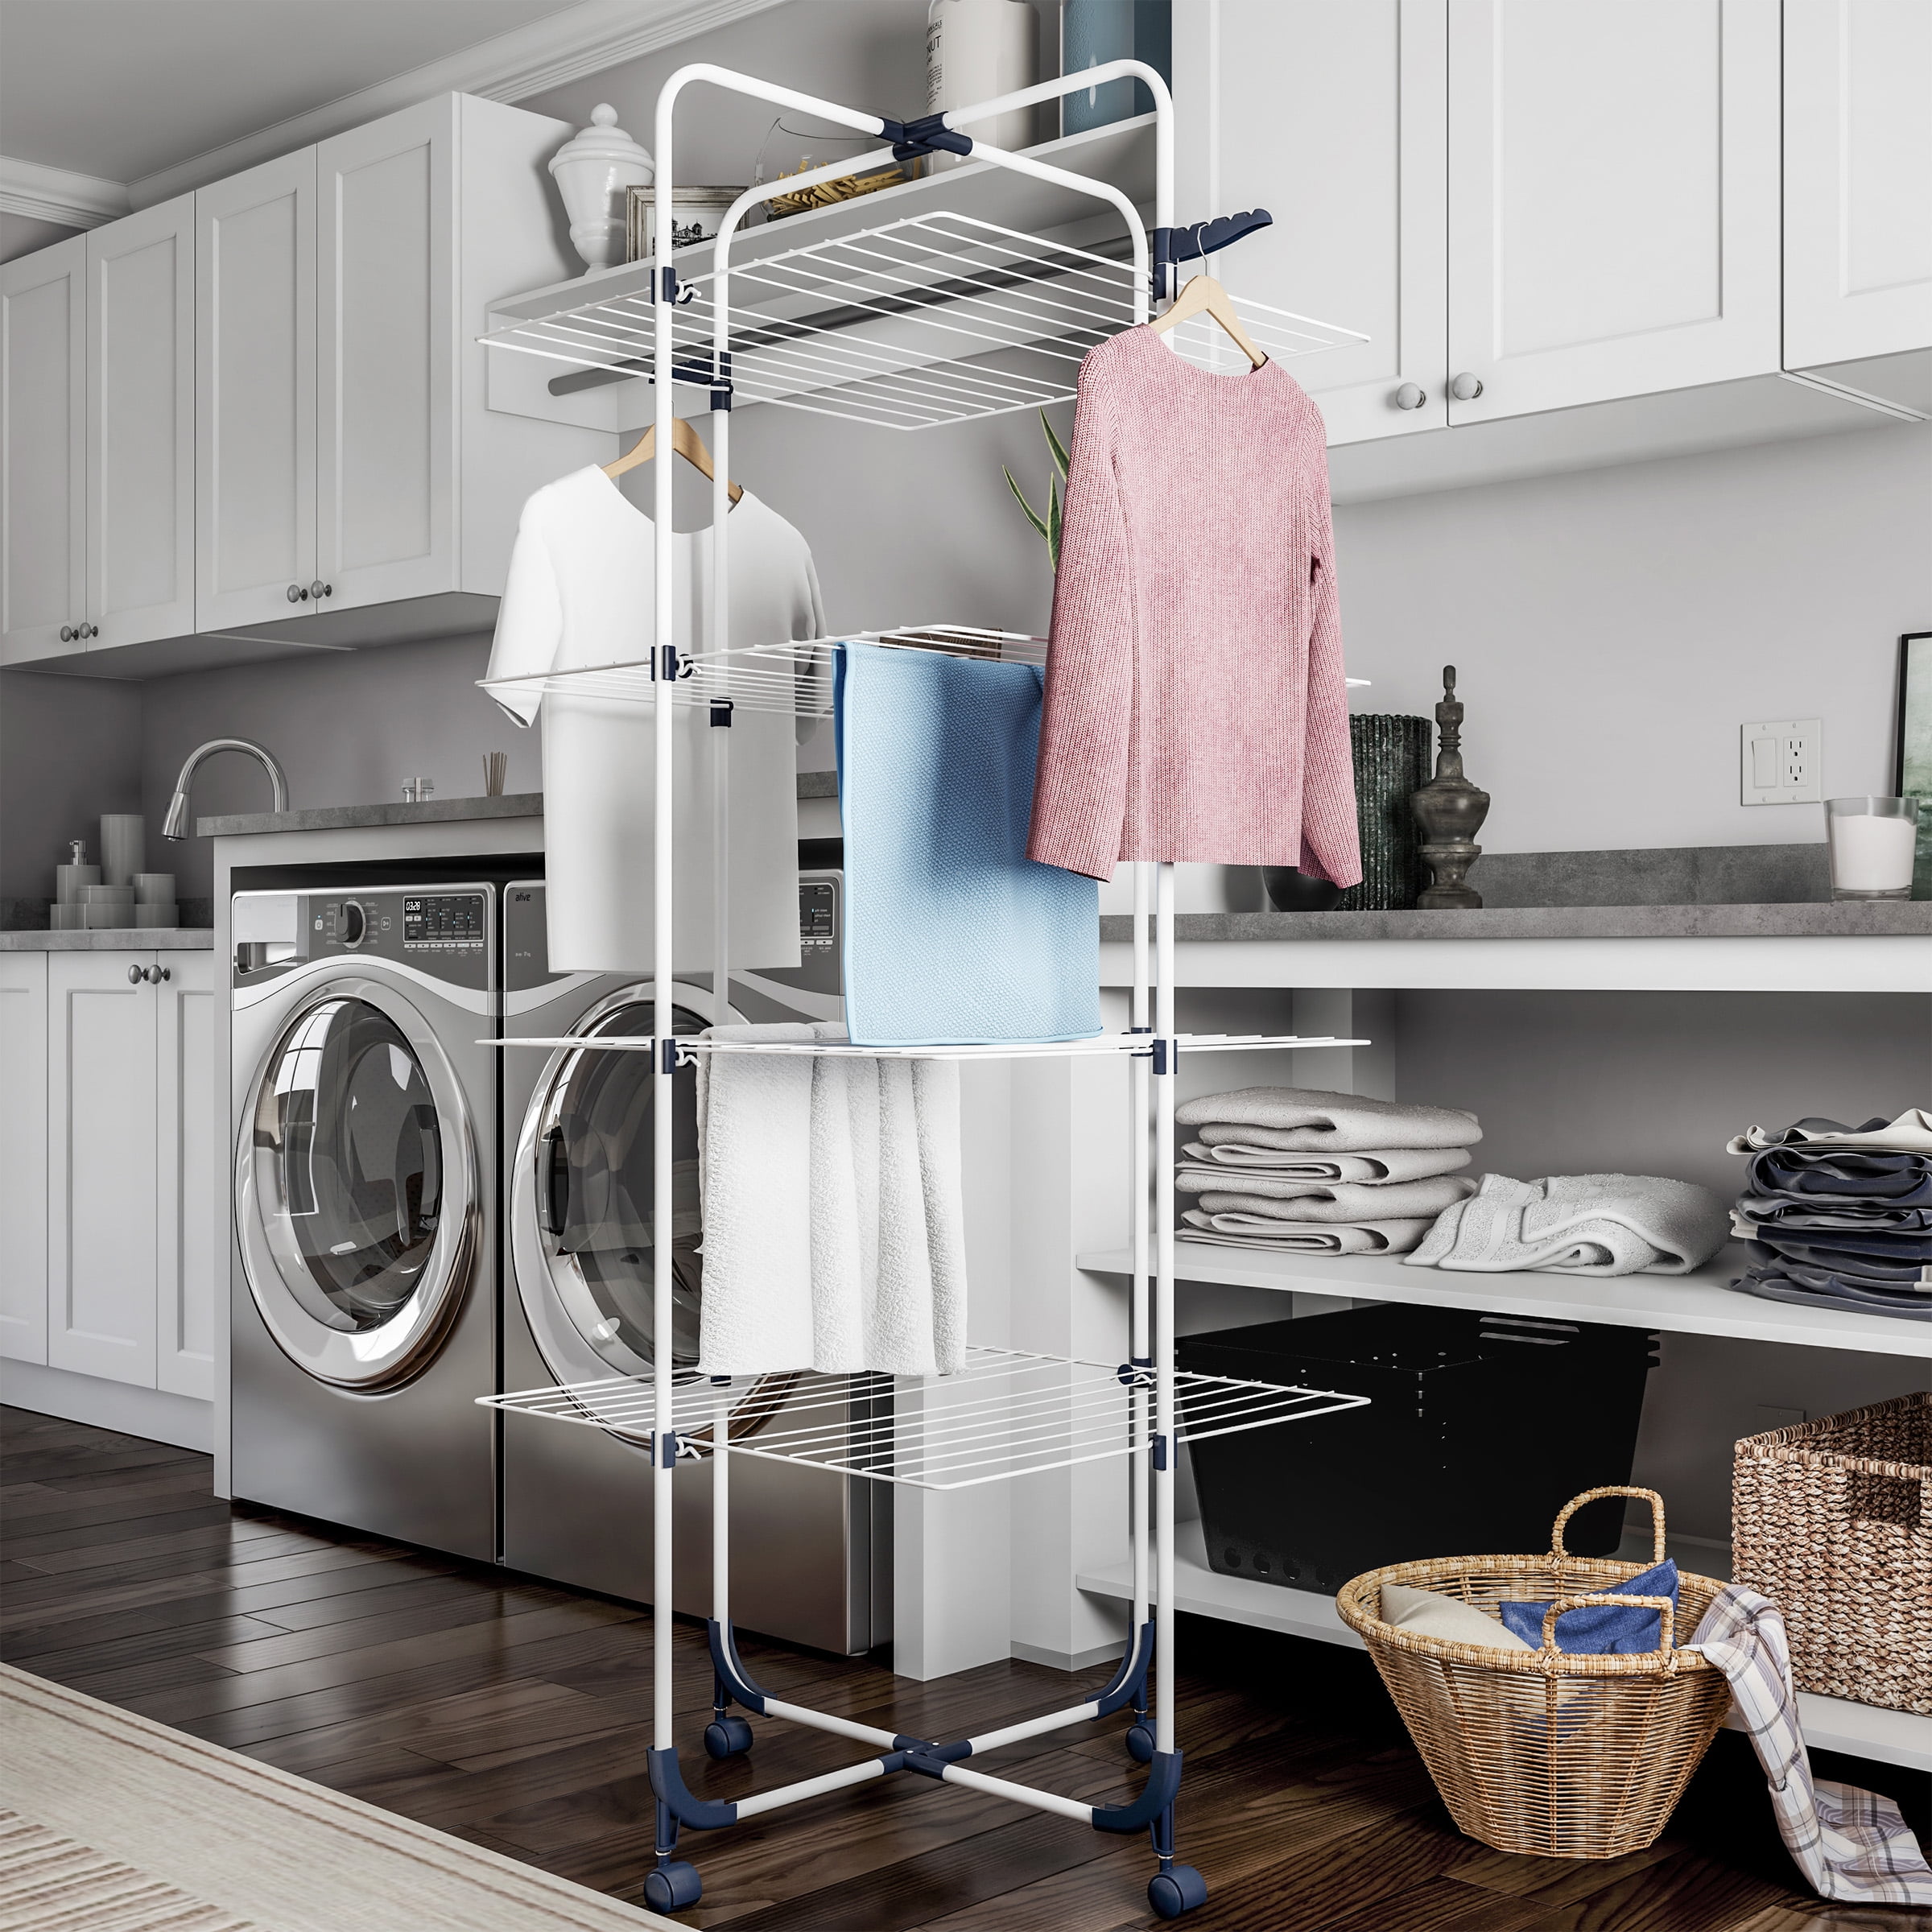 SHAREWIN Clothes Drying Rack for Laundry Free Installed Space Saving Folding Ha 